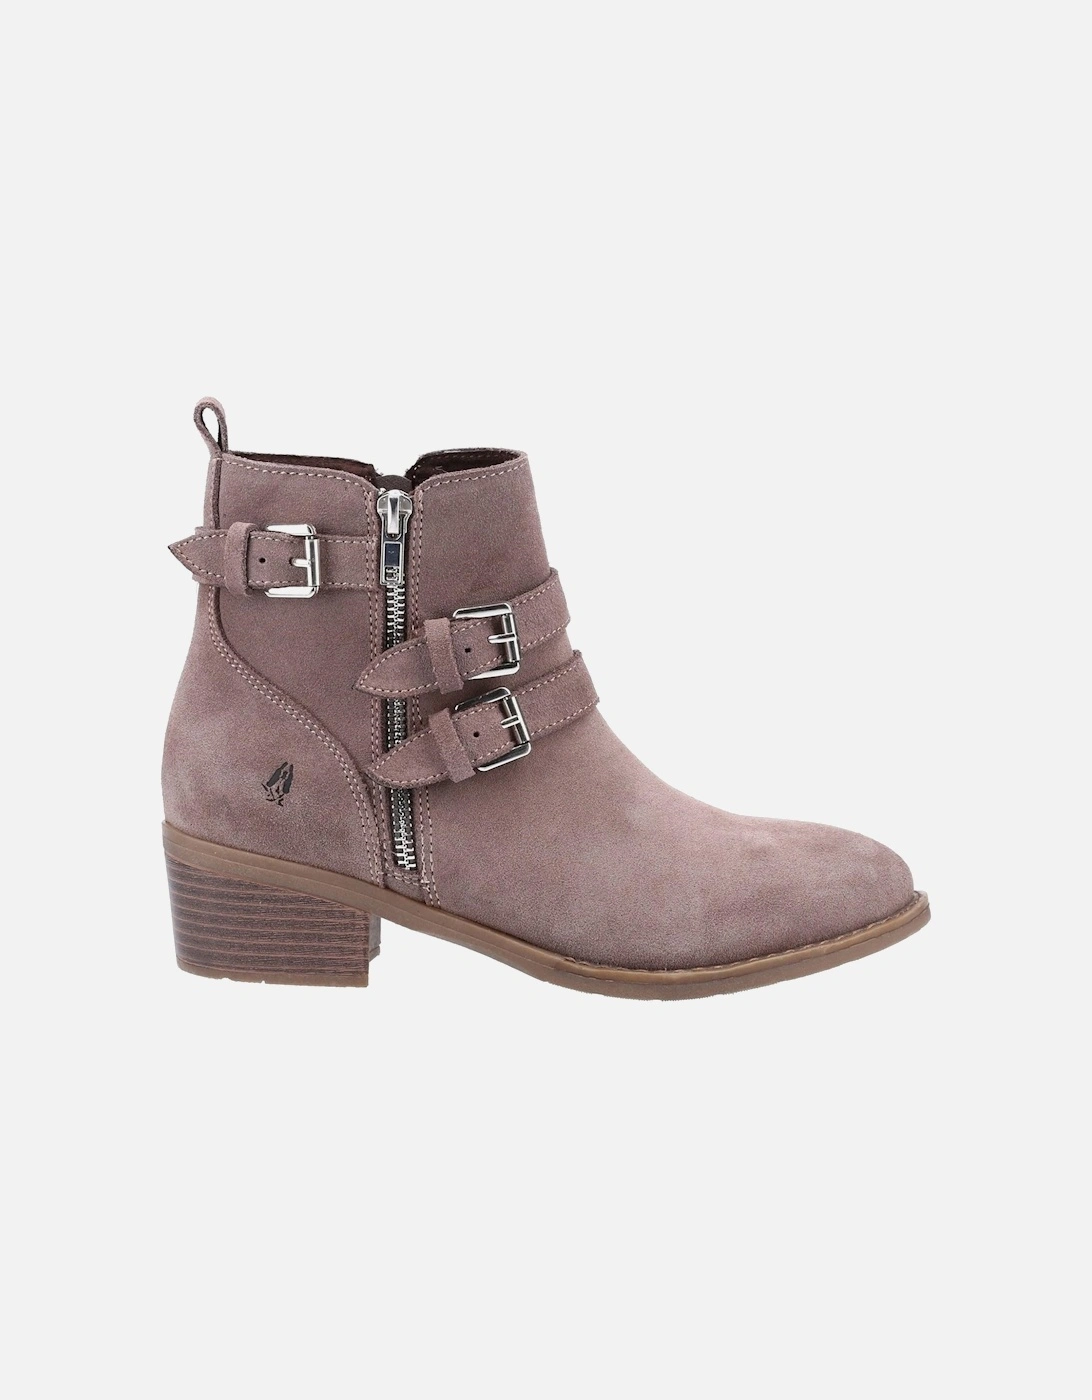 Womens/Ladies Jenna Leather Ankle Boots